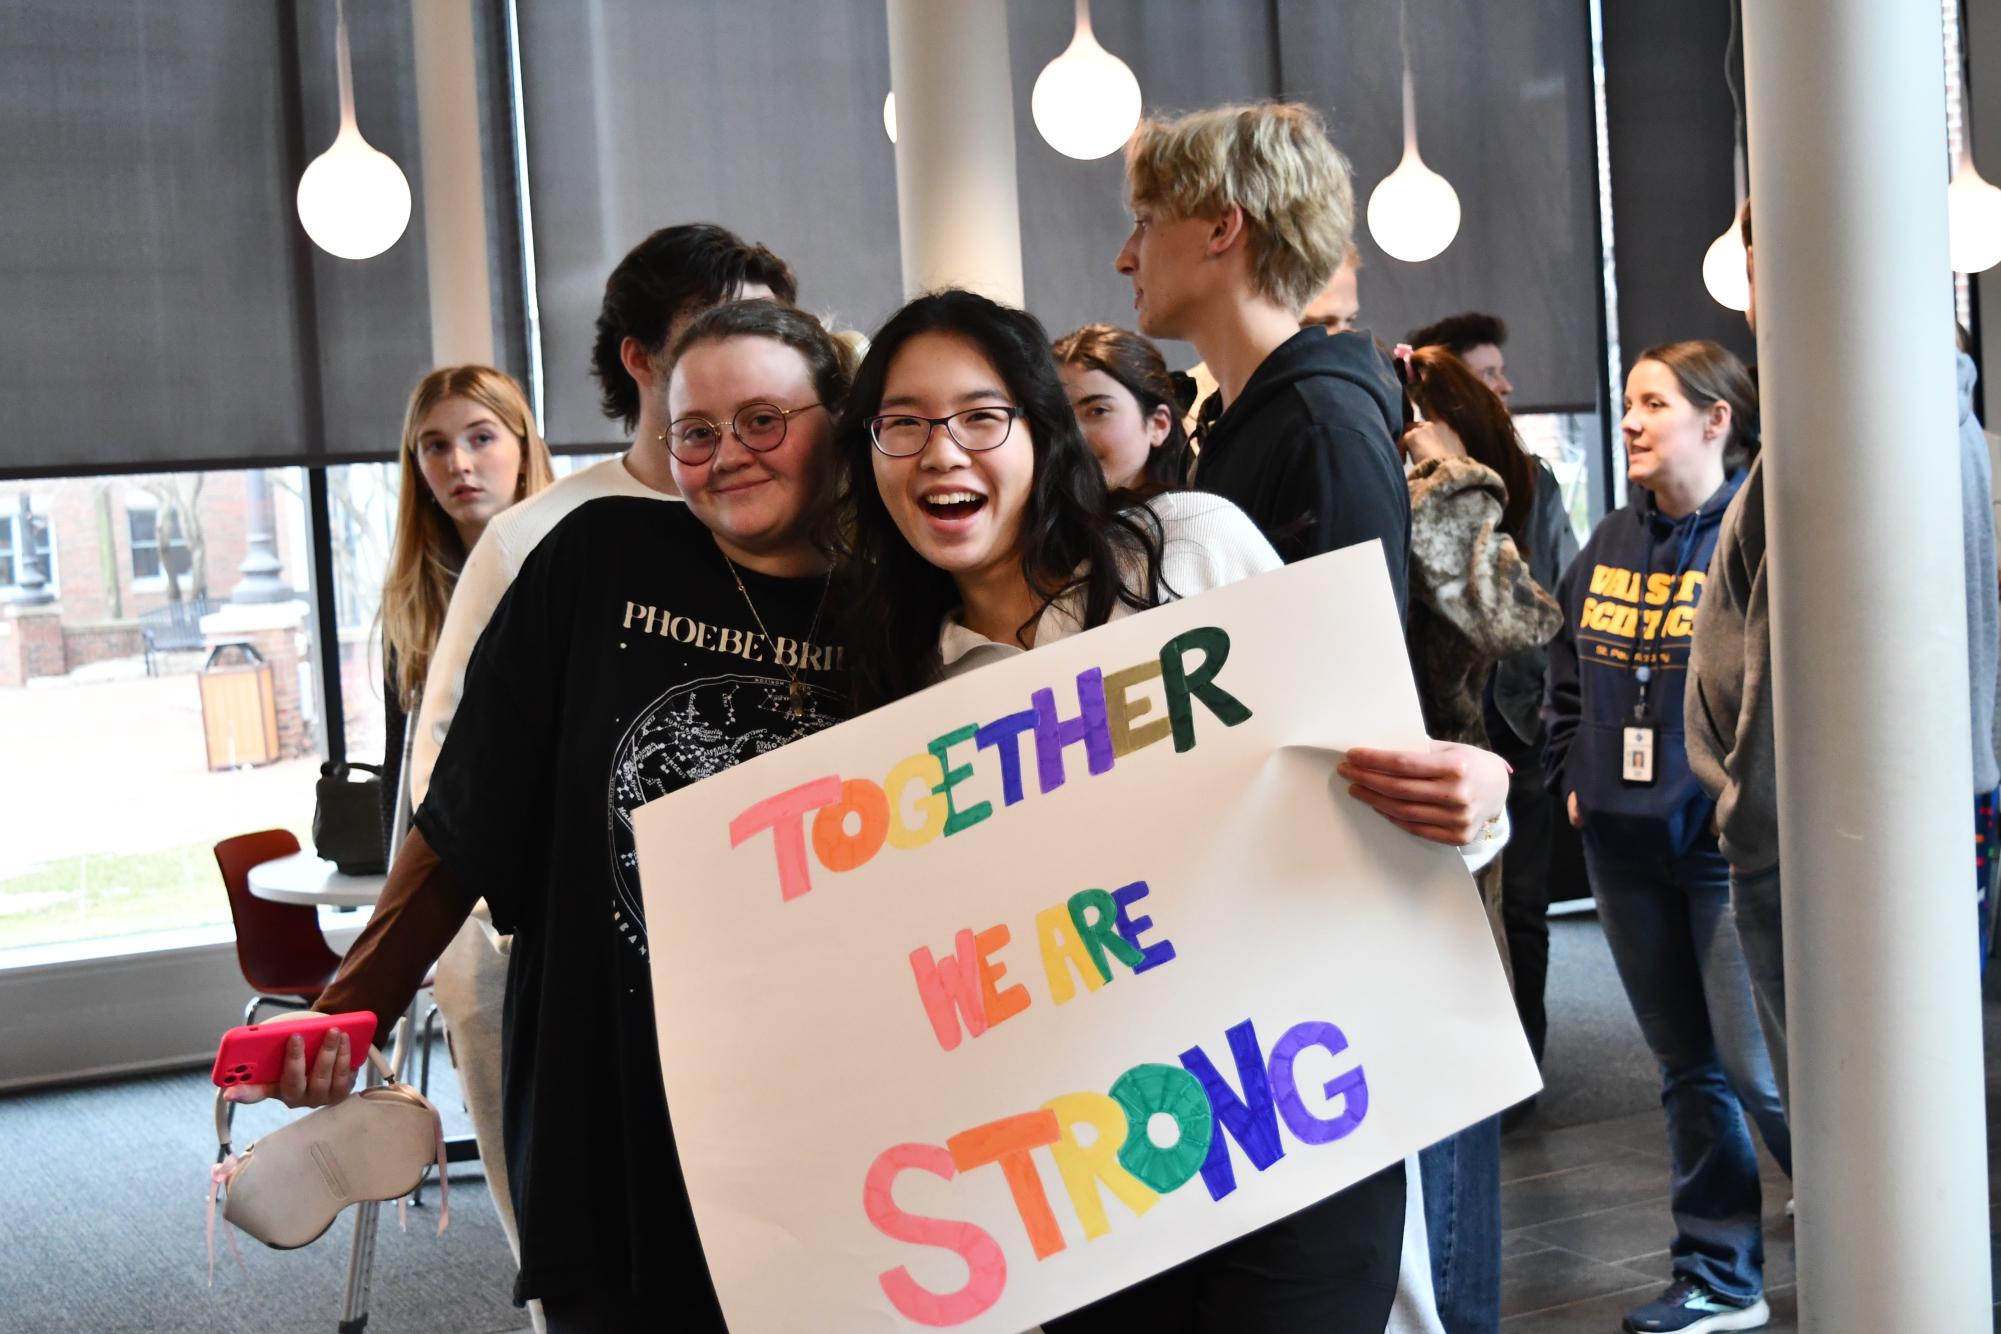 BETTER TOGETHER. Ronnie Dixon and Deling Chen smile as they march in support of sexual consent. After an assembly about sexual assault and consent, all students and faculty participated in a short march around the upper school.